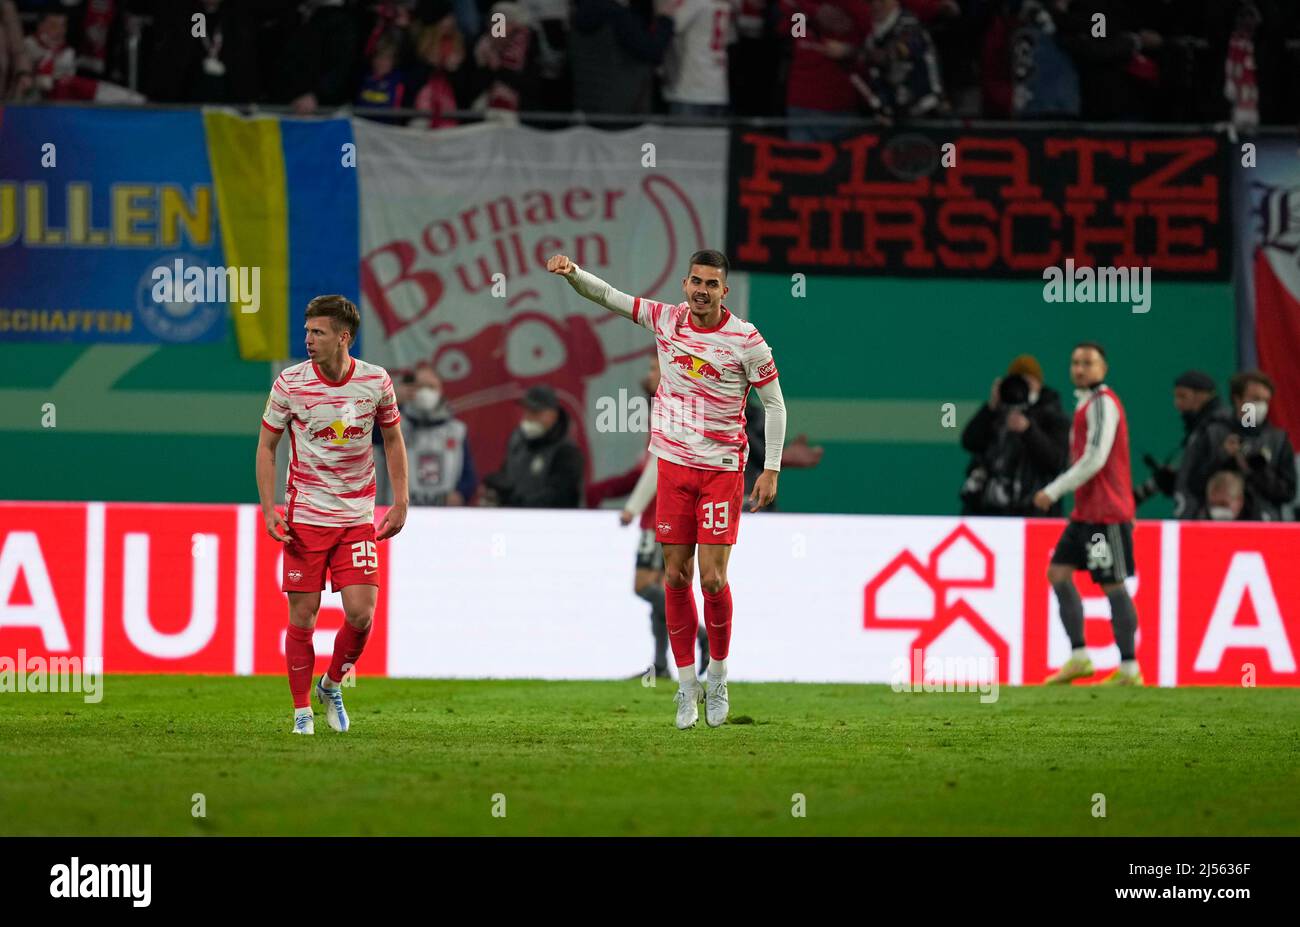 Leipzig, Germany - April 20:Fans celebrate Sheraldo Becker of Union Berlin scoring scoring their first goal during the DFB-Pokal Semi-final match between RB Leipzig against 1. FC Union Berlin at Red Bull Arena on April 20, 2022 in Leipzig, Germany. (Photo by Thor Wegner/DeFodi Images) Stock Photo